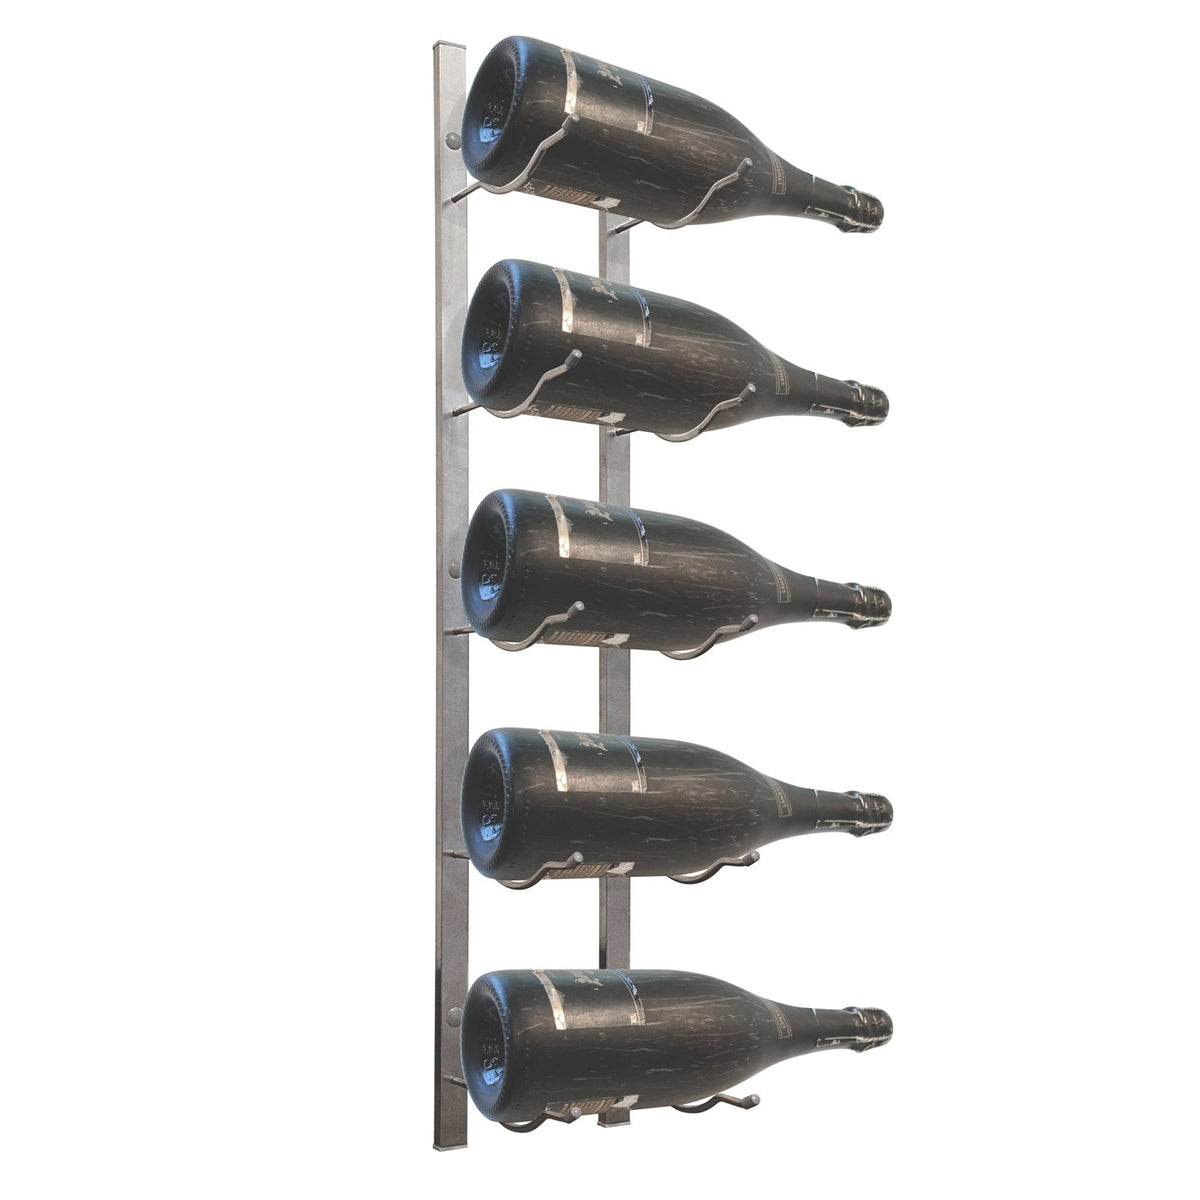 Vinotemp EP - WIRE1 Epicureanist 5 - Bottle Magnum Metal Wine Rack, 5 1/4"W x 8"D x 35 3/4"H, in Stainless Steel (EP - WIRE1MS) - TheChefStore.Com